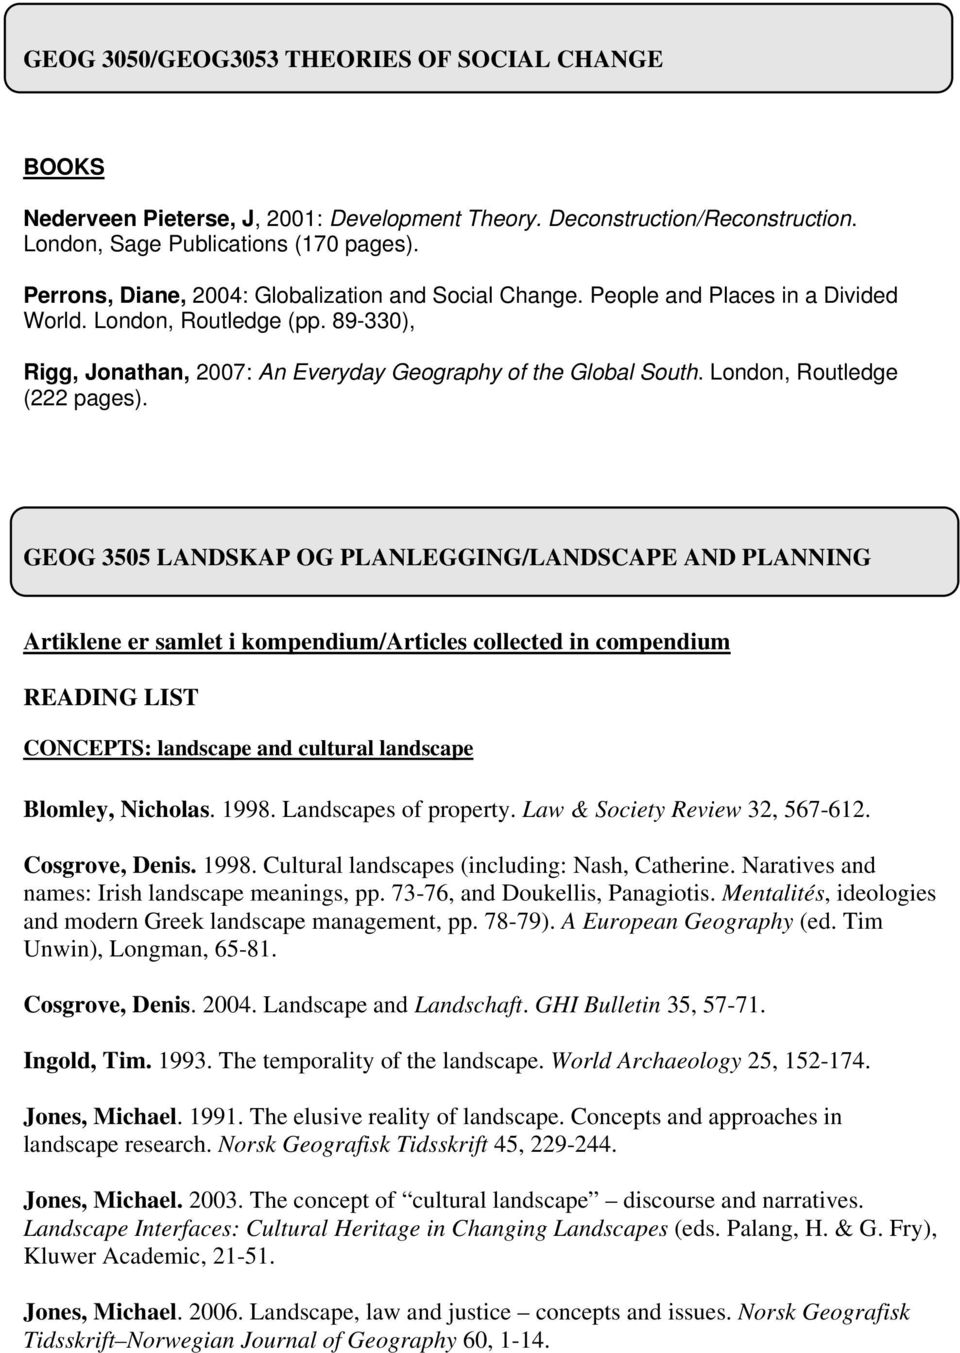 London, Routledge (222 pages).